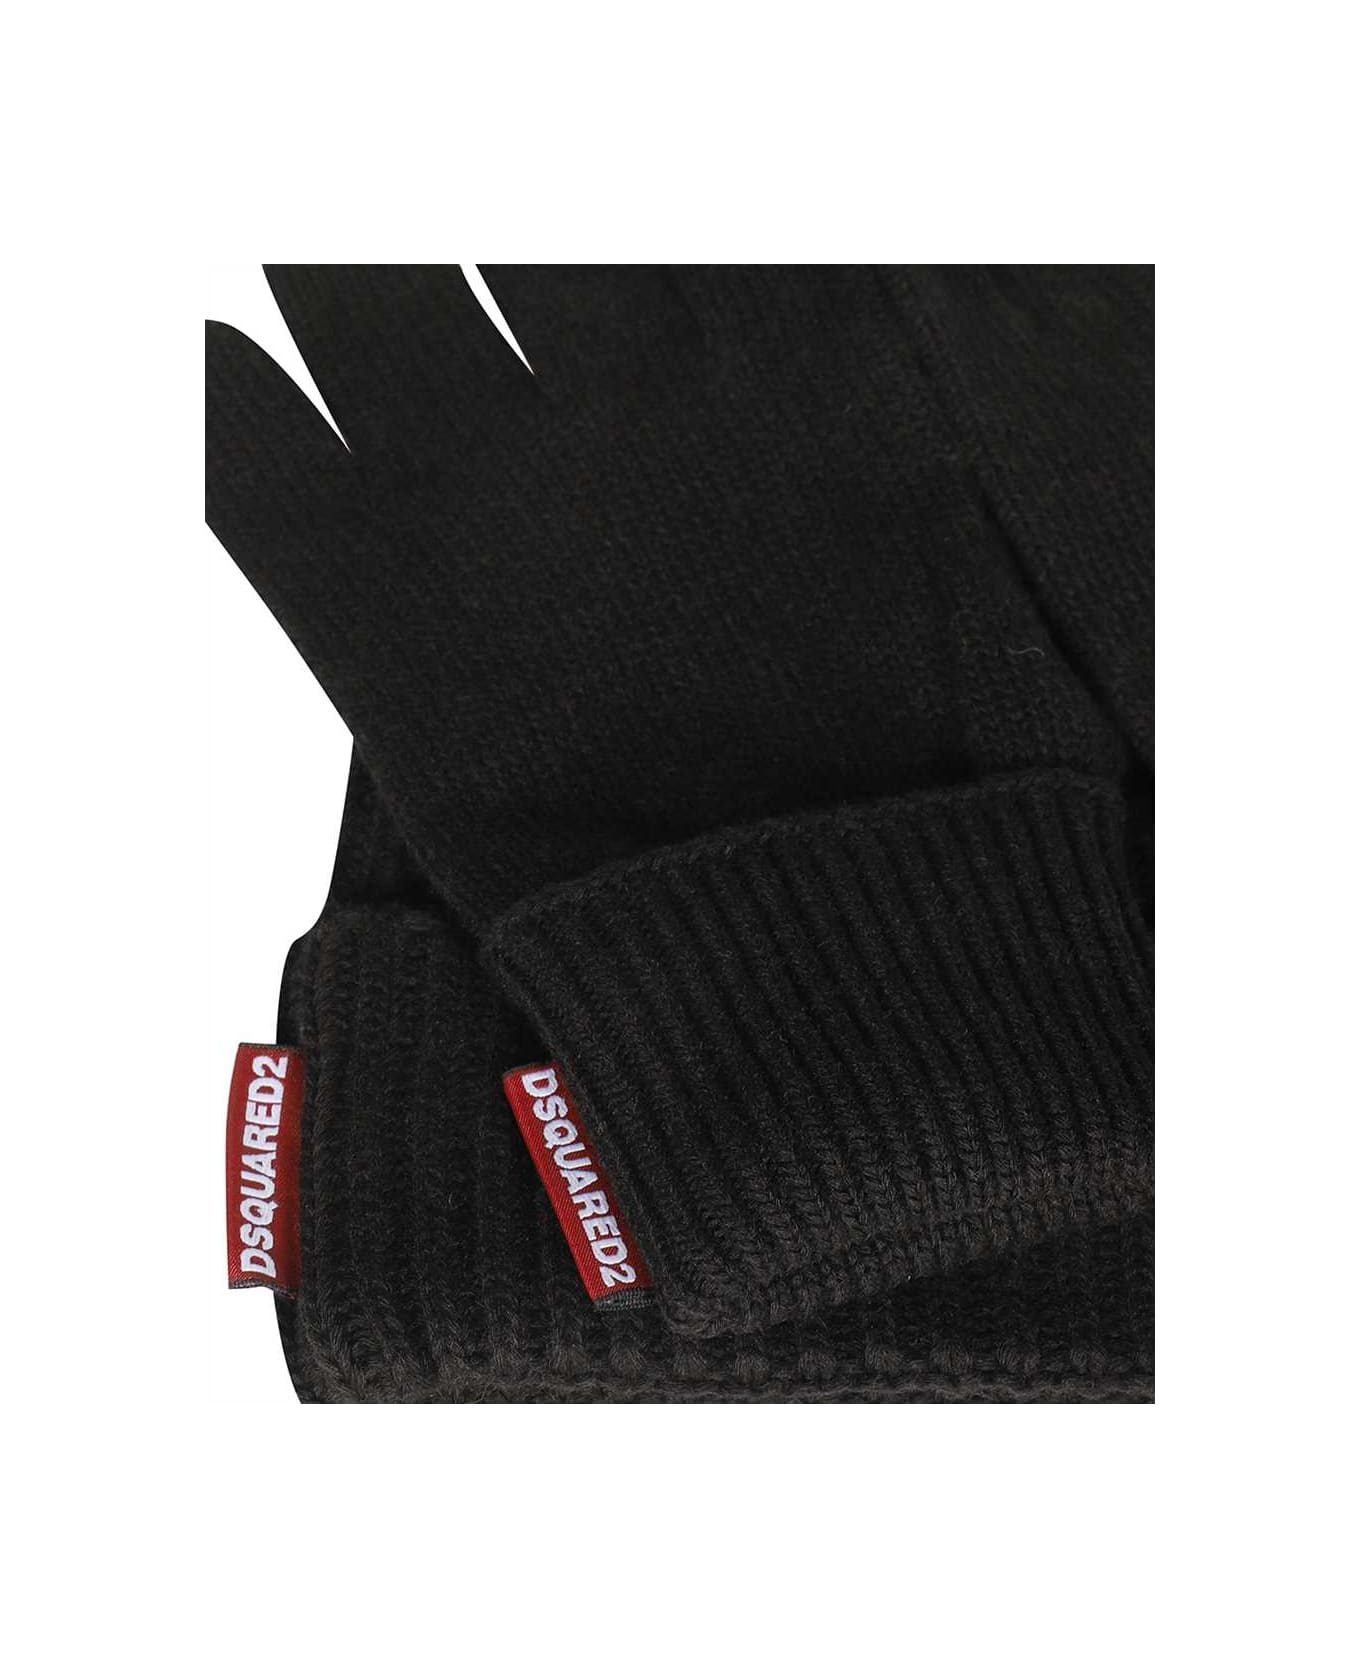 Dsquared2 Knitted Hat And Gloves Set - black 帽子